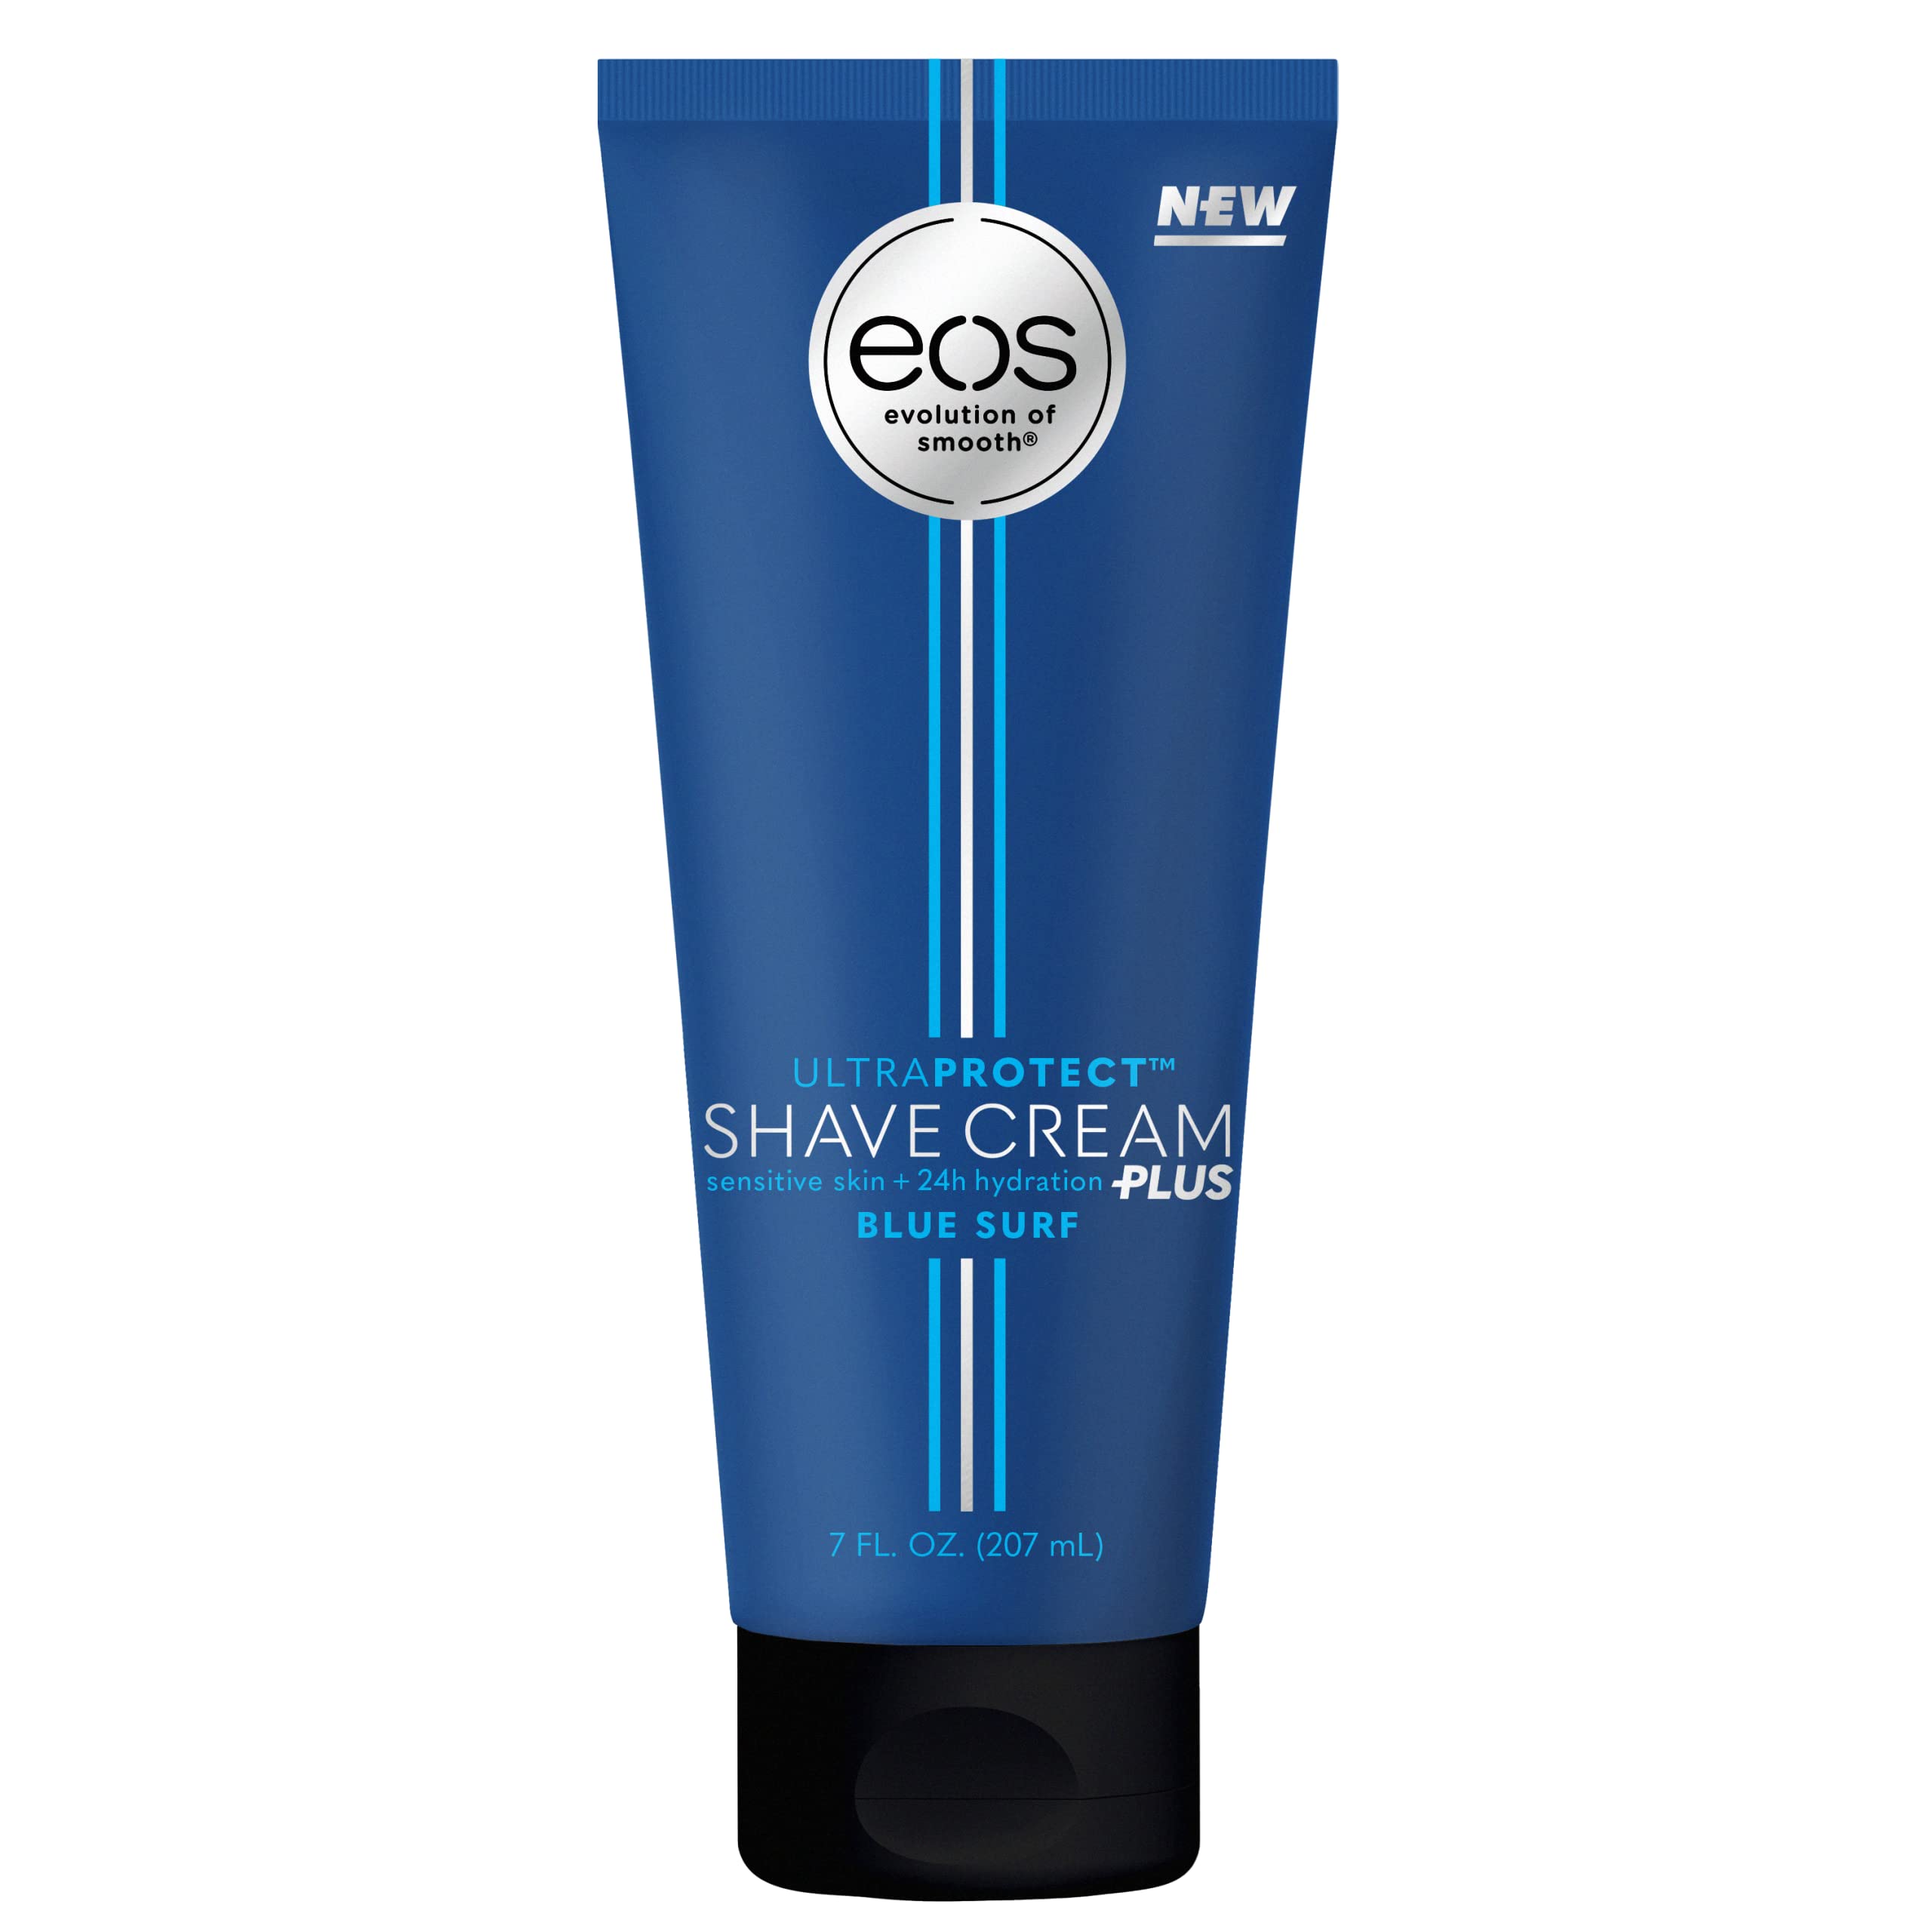 7-Oz eos UltraProtect Men’s Shave Cream (Blue Surf) $4.18 w/ S&S + Free Shipping w/ Prime or on $35+